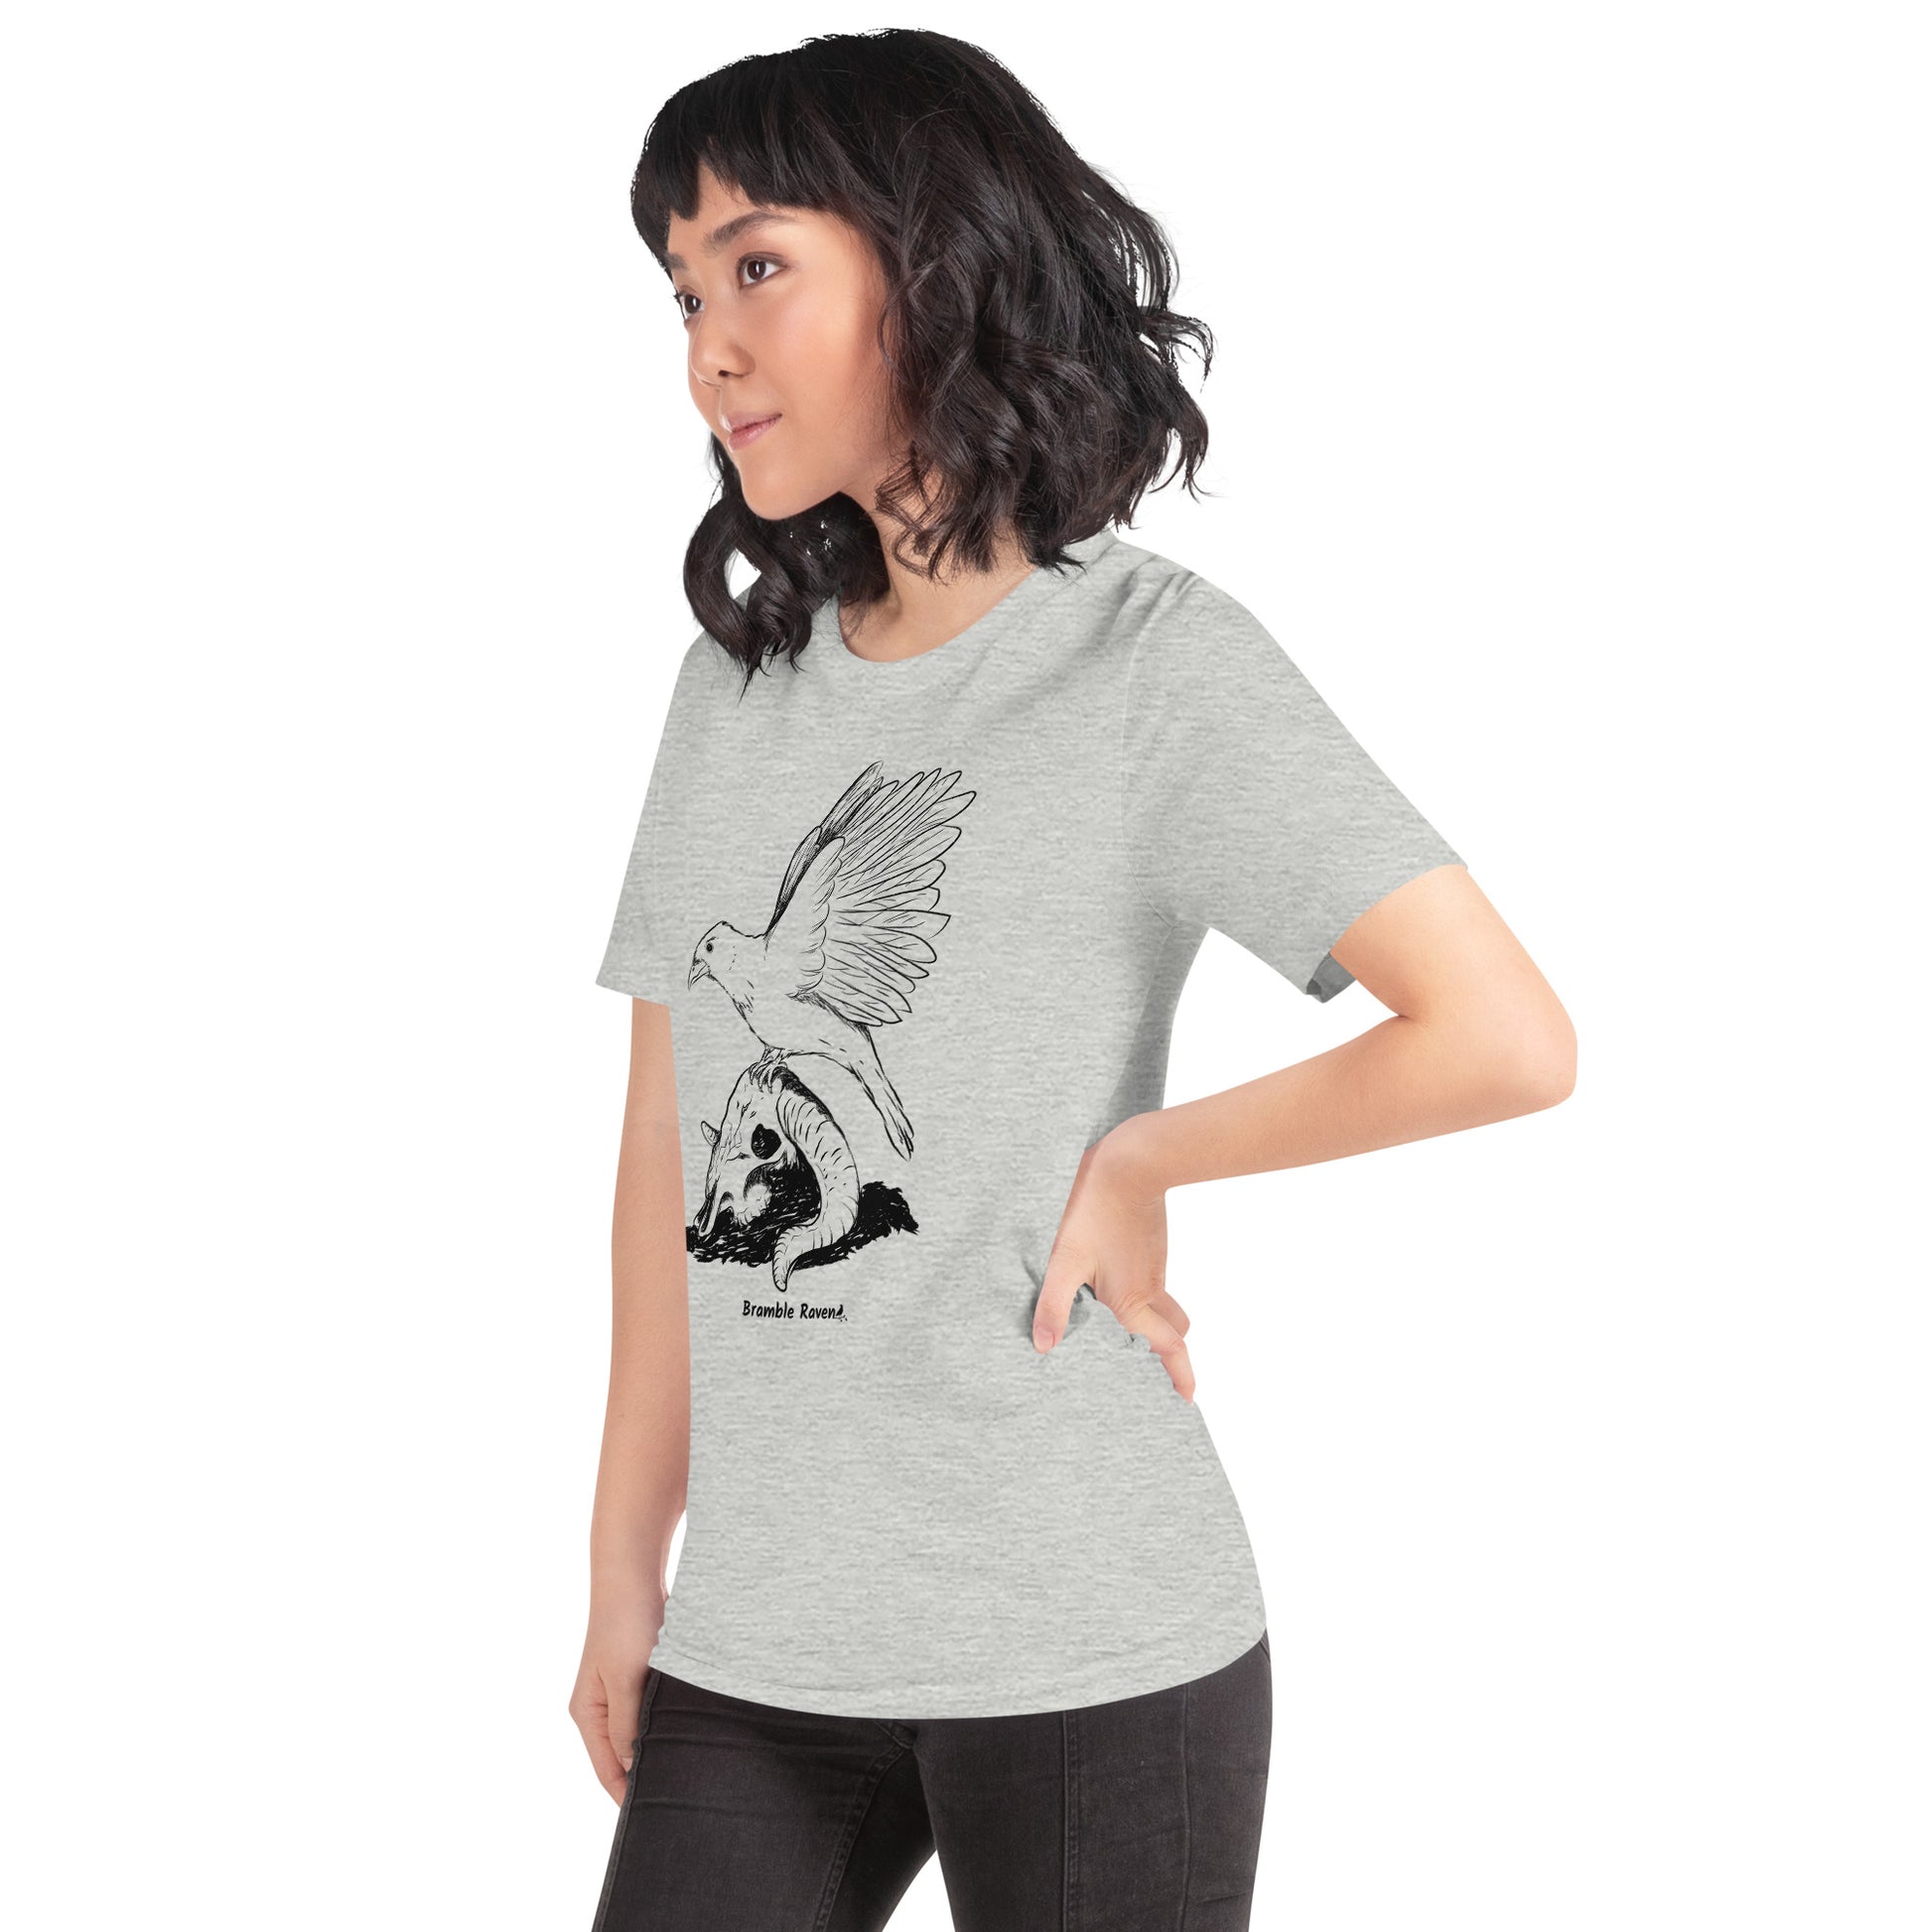 Athletic heather grey colored unisex t-shirt. Features Reflections illustration of a crow with wings outstretched sitting on a sheep skull. Shown on female model.